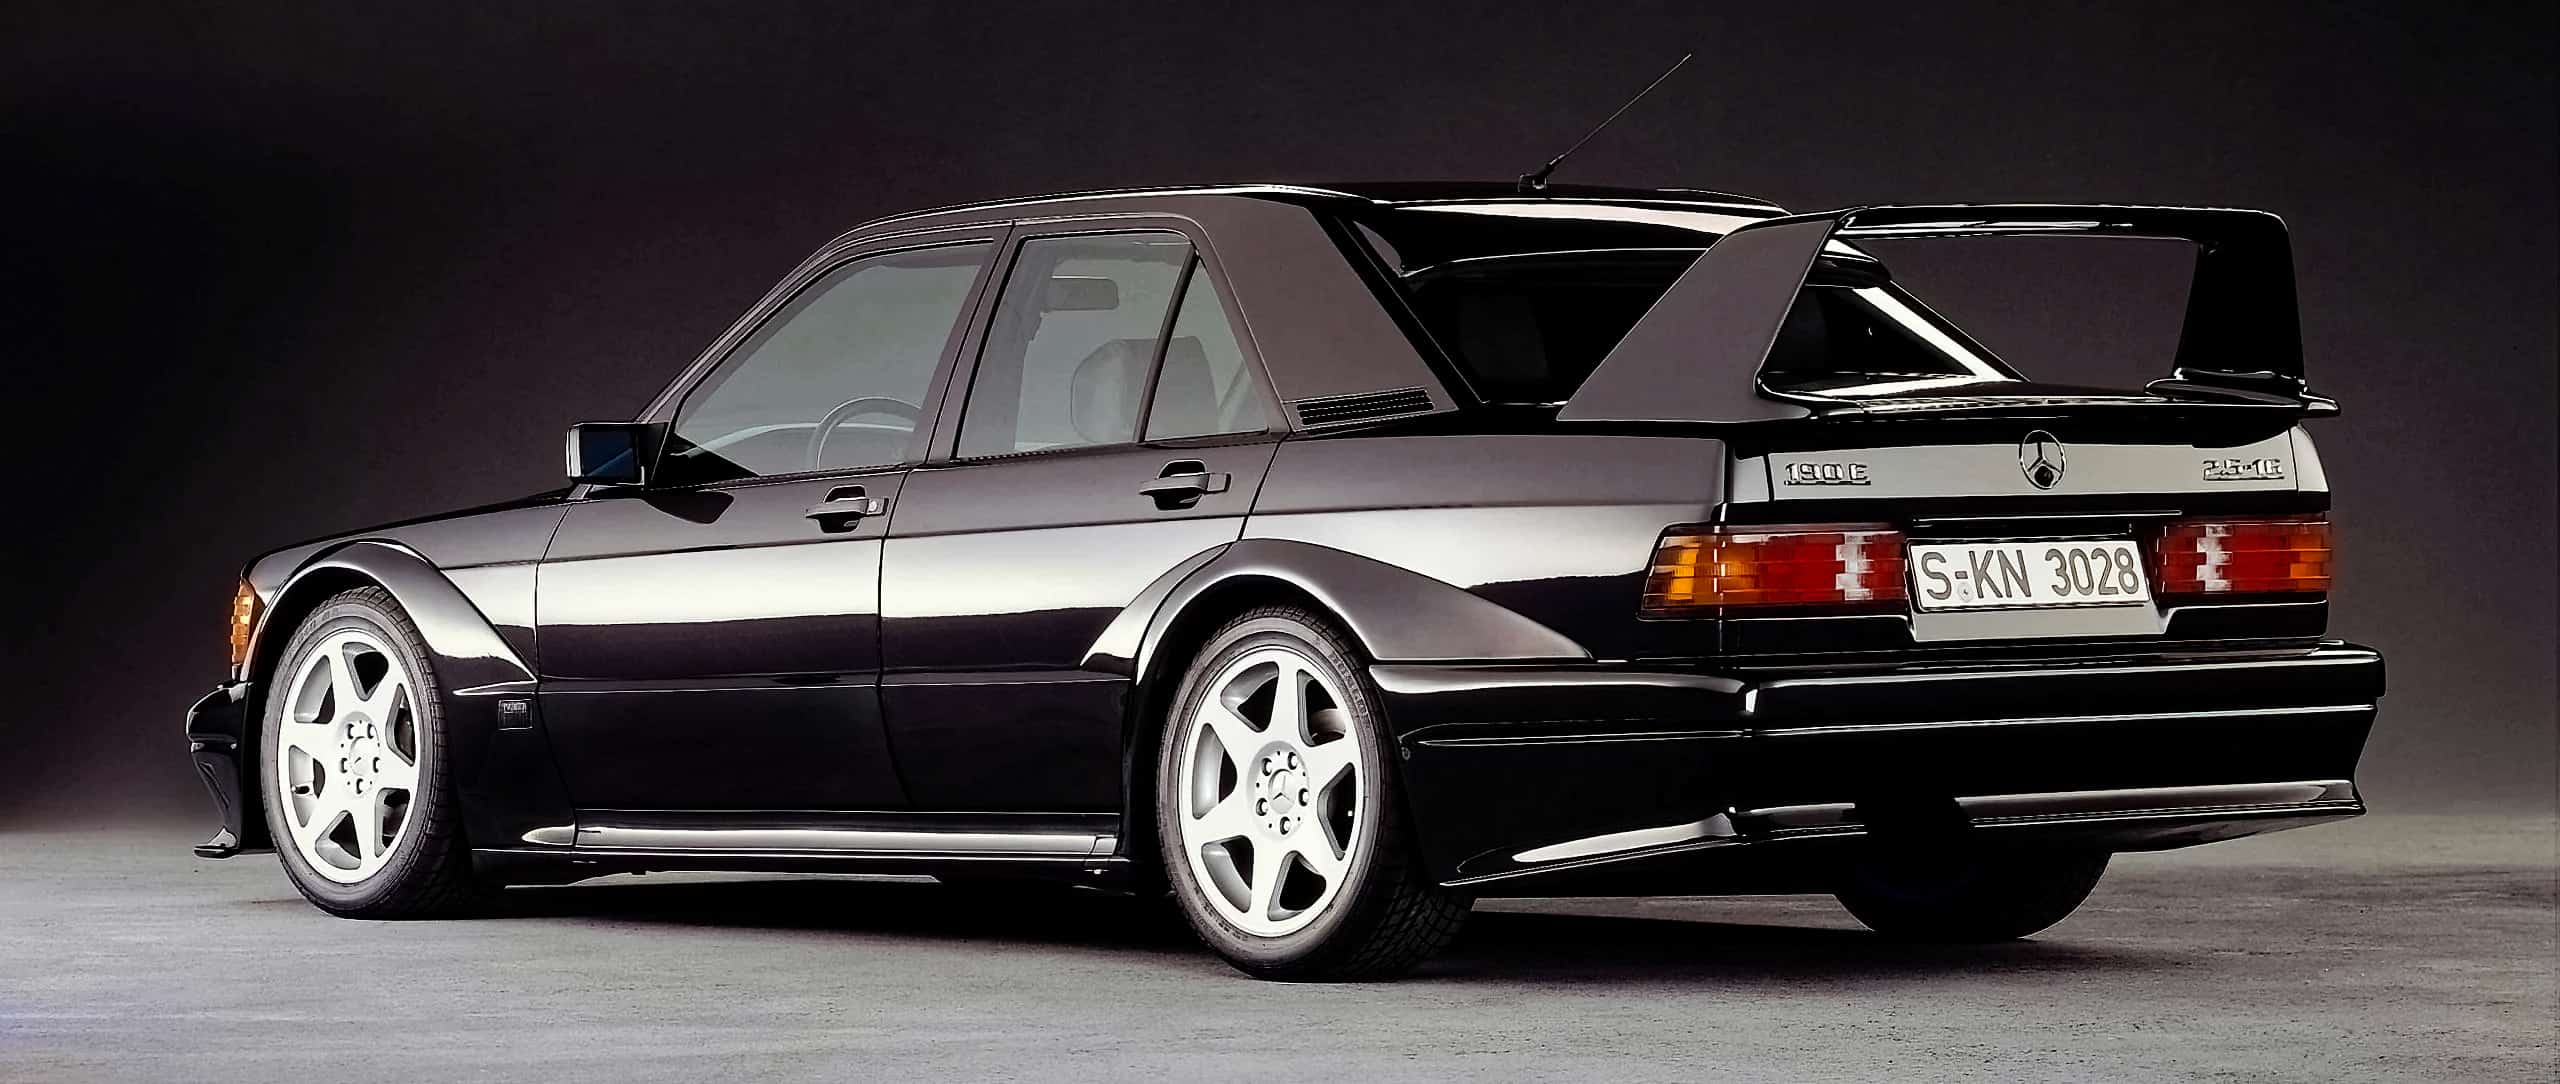 The Mercedes-Benz W124 Is The Prime Example Of The Brand's Over-Engineering